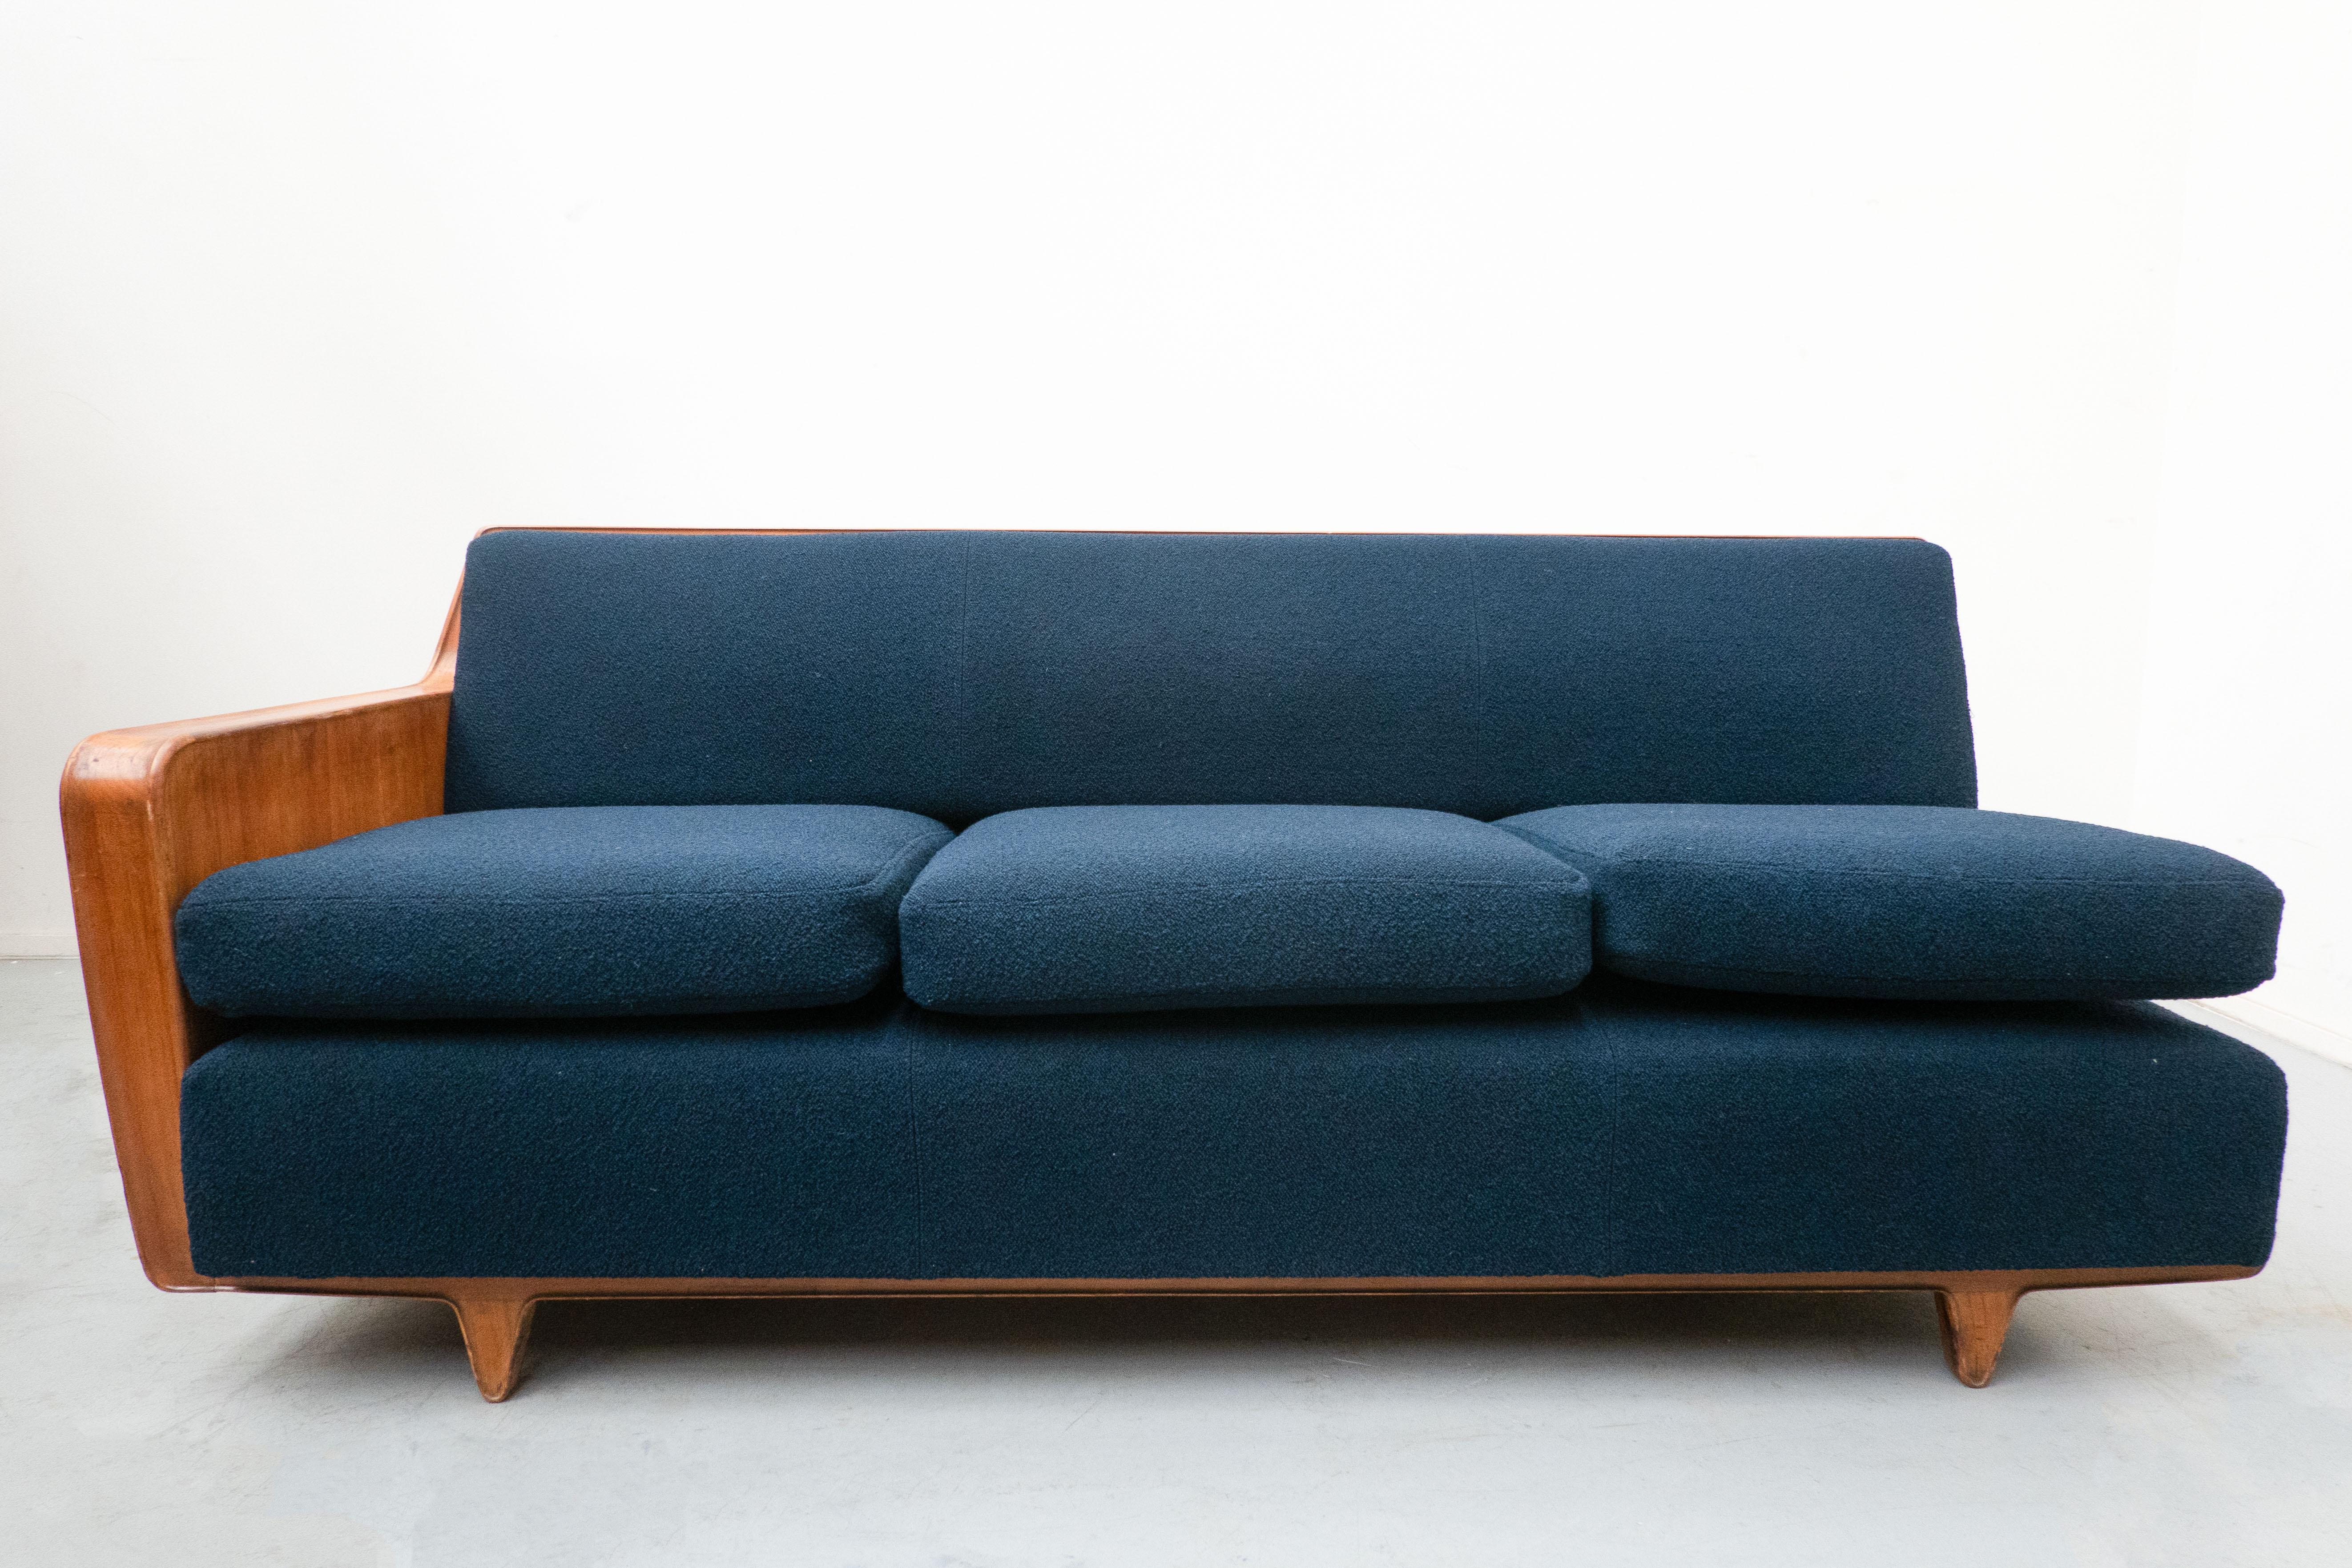 Mid-20th Century Mid-Century Modern Blue Sofa Attributed to Melchiorre Bega, Cherry Wood, Italy  For Sale